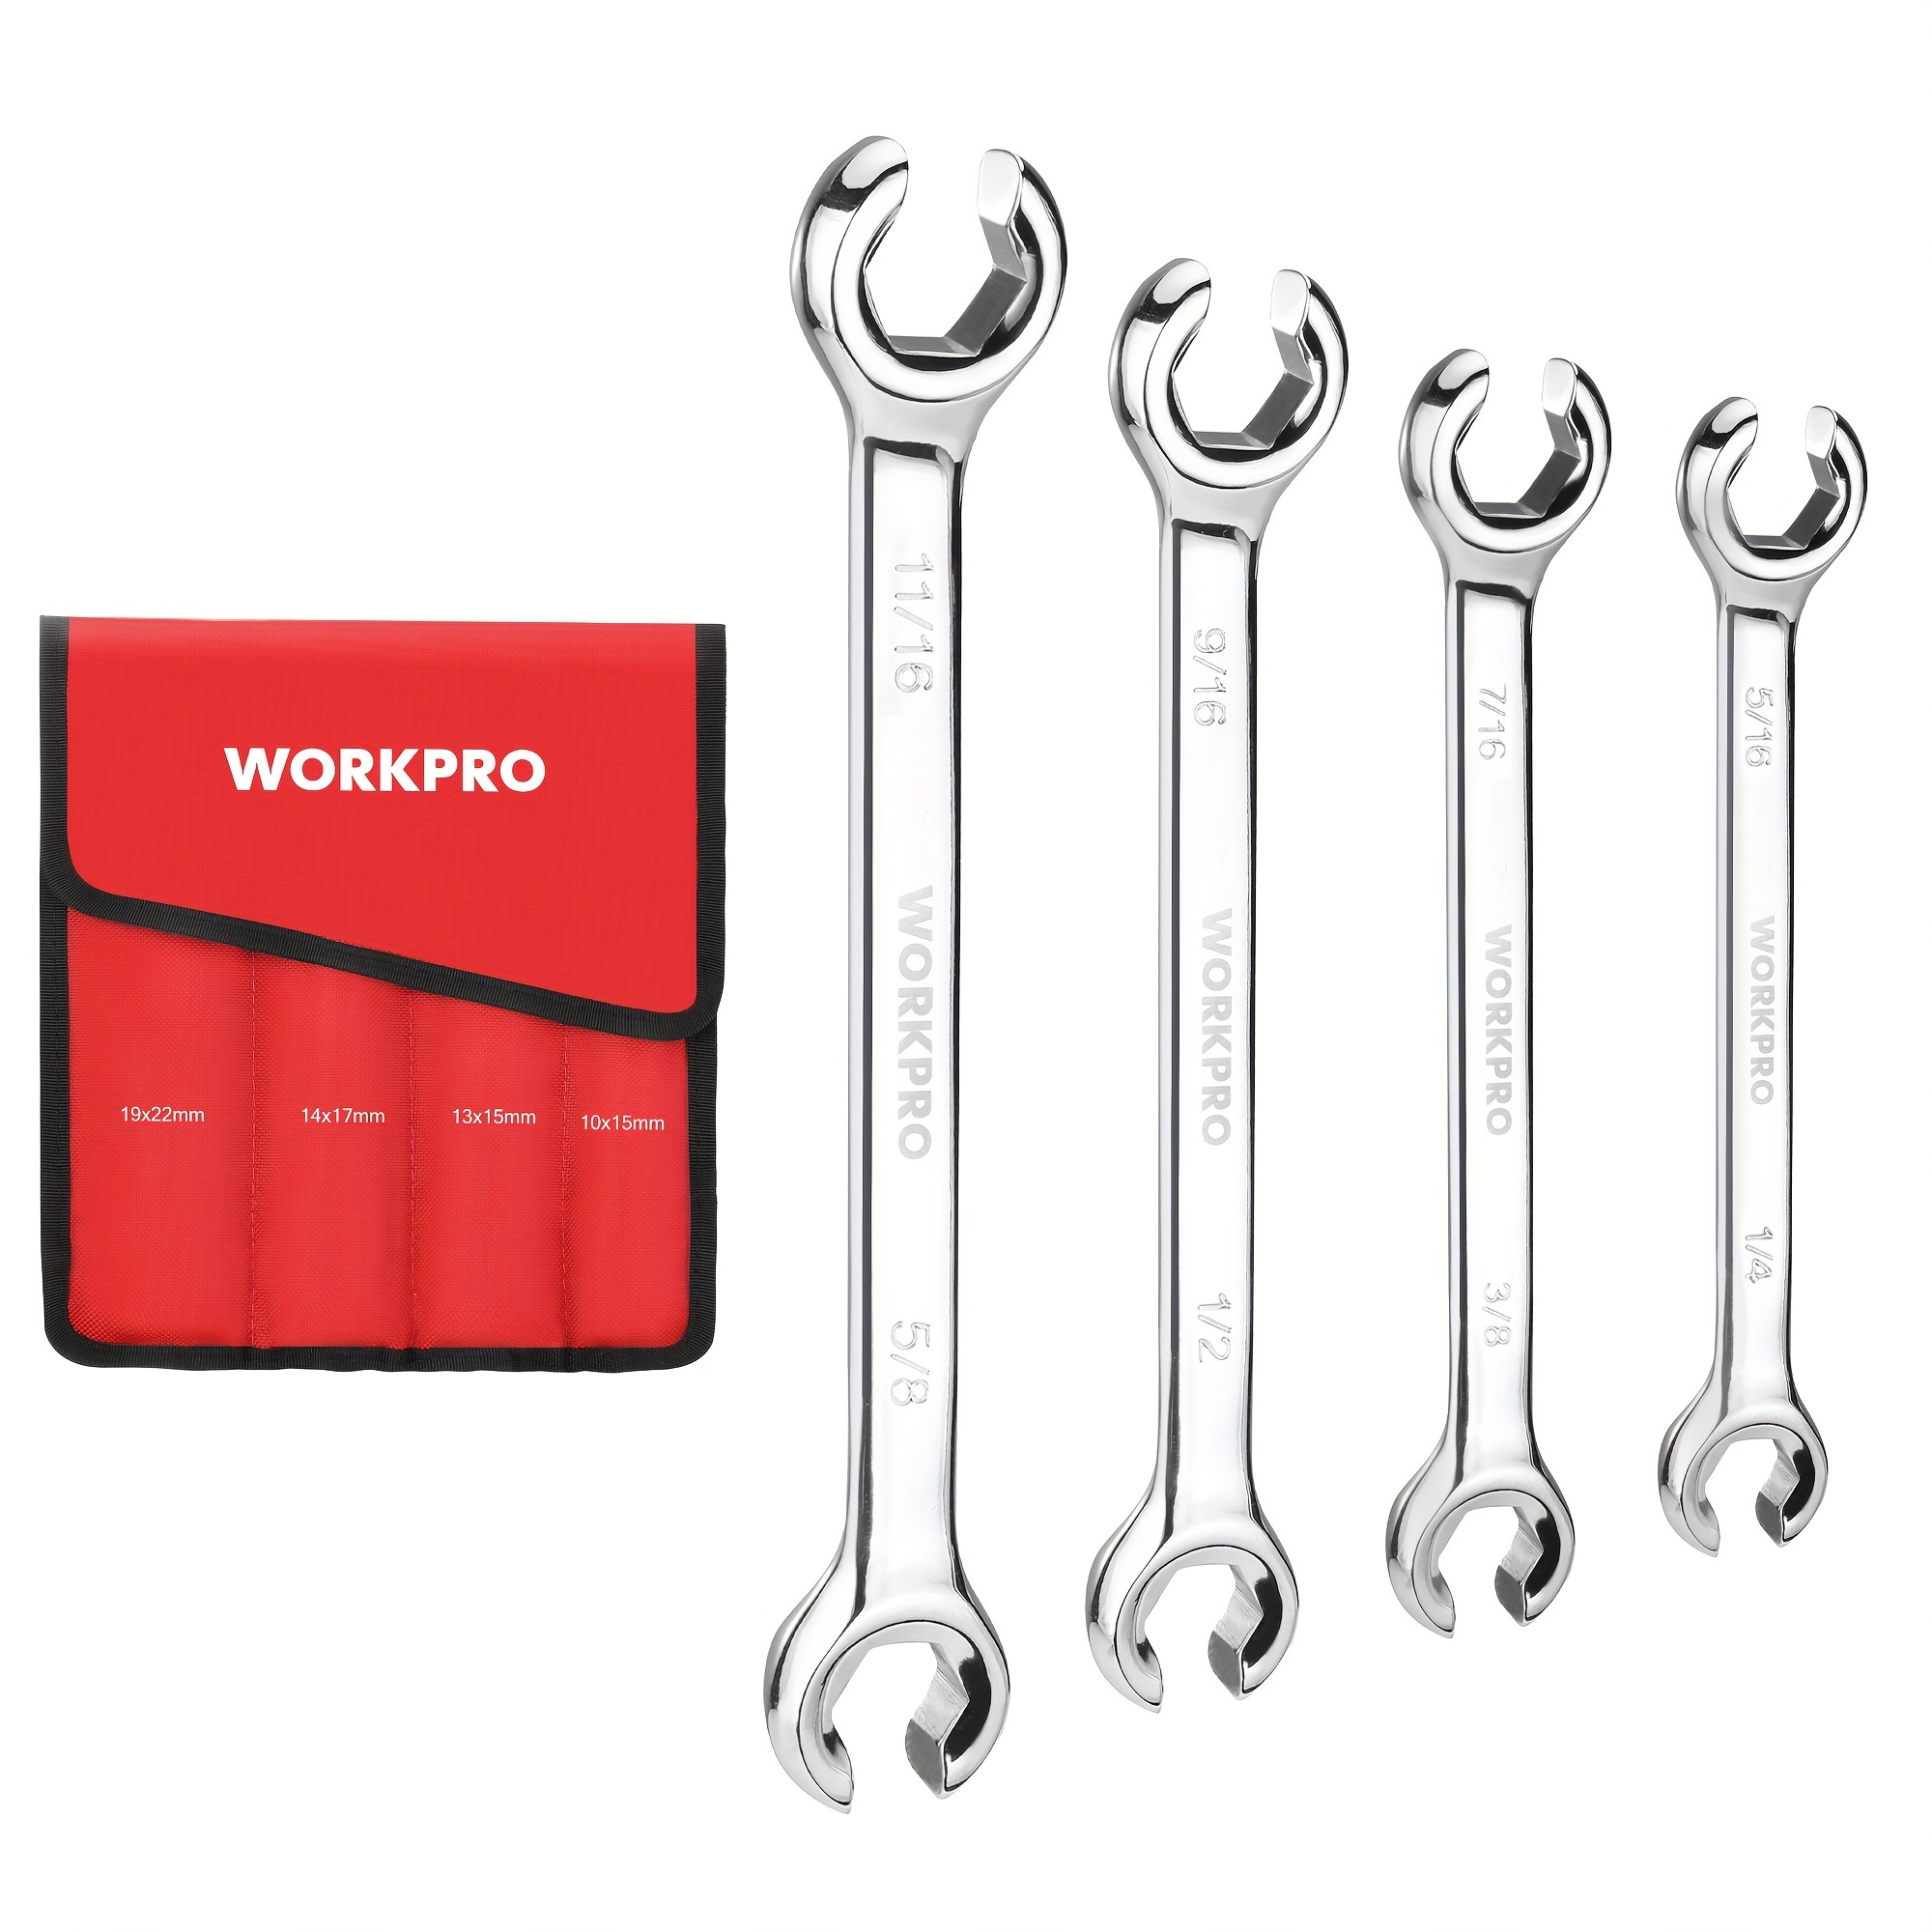 

Workpro 4-piece Flare Nut Wrench Set, Sae Brake Line Wrenches, 1/4", 5/16", 3/8", 7/16", 1/2", 9/16", 5/8", 11/16", Cr-v Steel, 15° Offset Head Tubing Wrench, Organizer Pouch Included